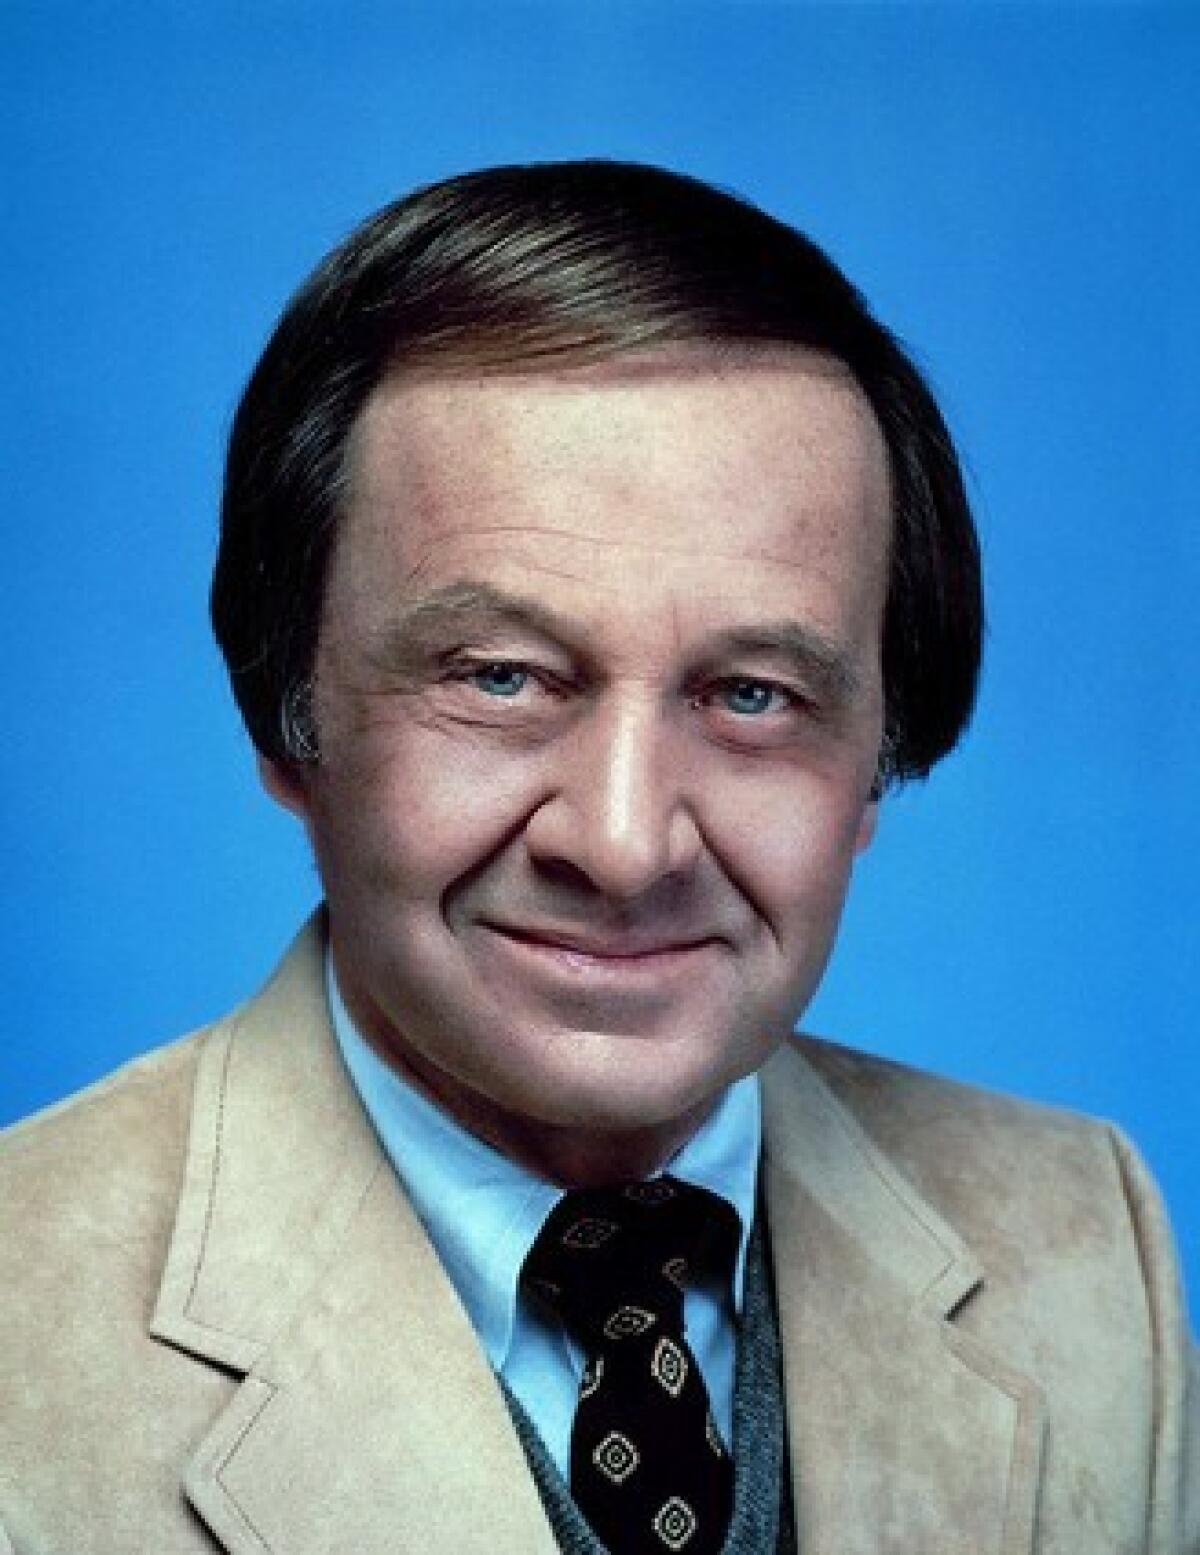 ABC debuted the anthology series “Wide World of Sports” on this date in 1961 with Jim McKay as host.